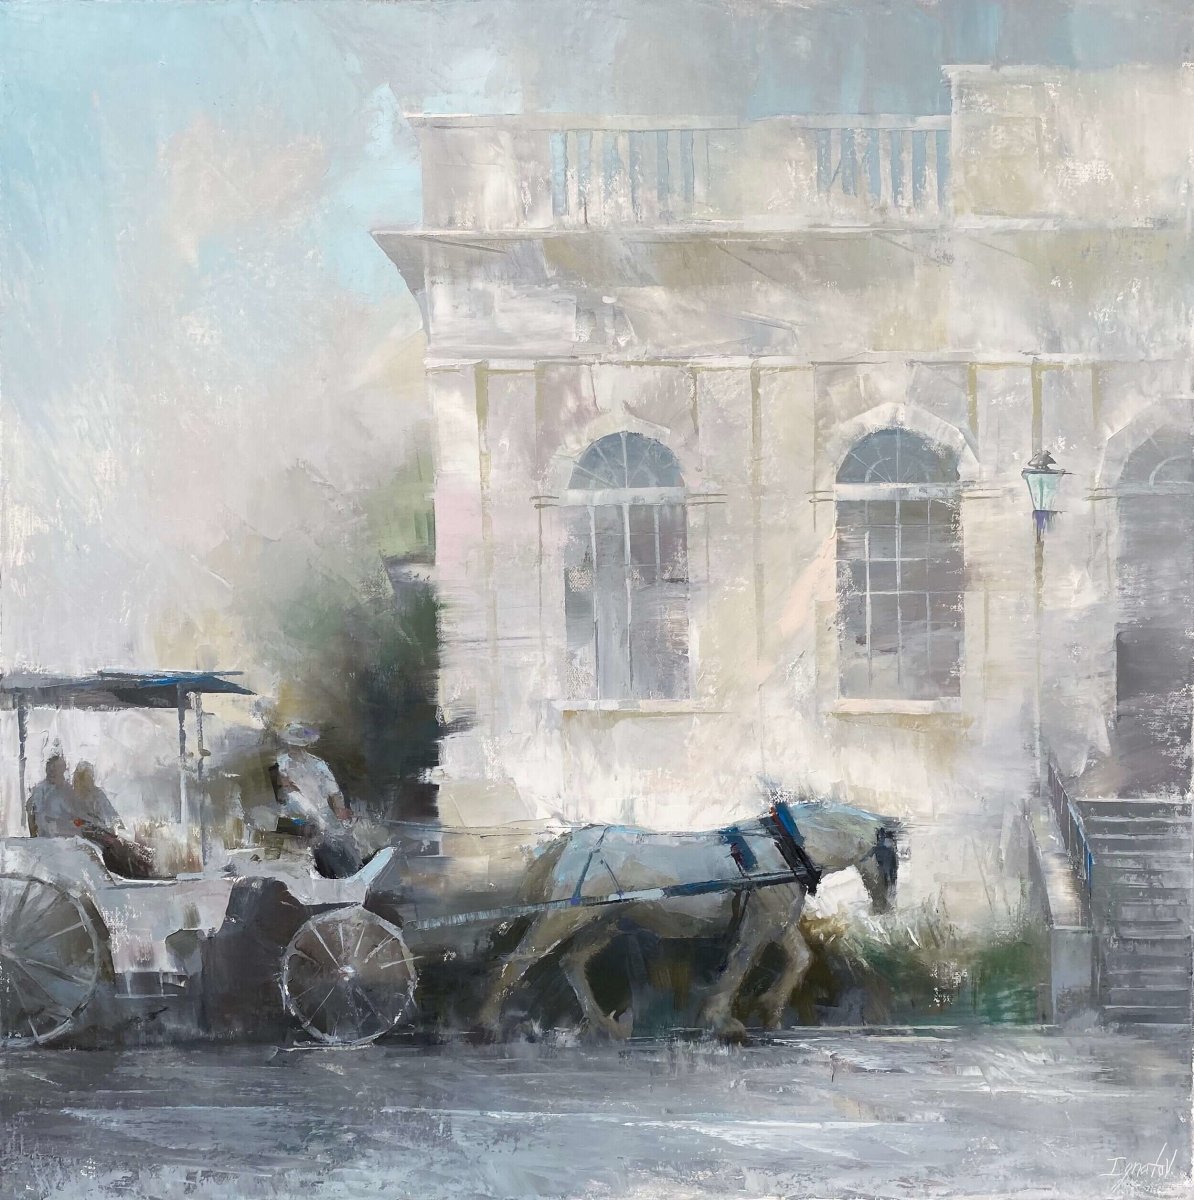 A Ride Through History by Ignat Ignatov at LePrince Galleries